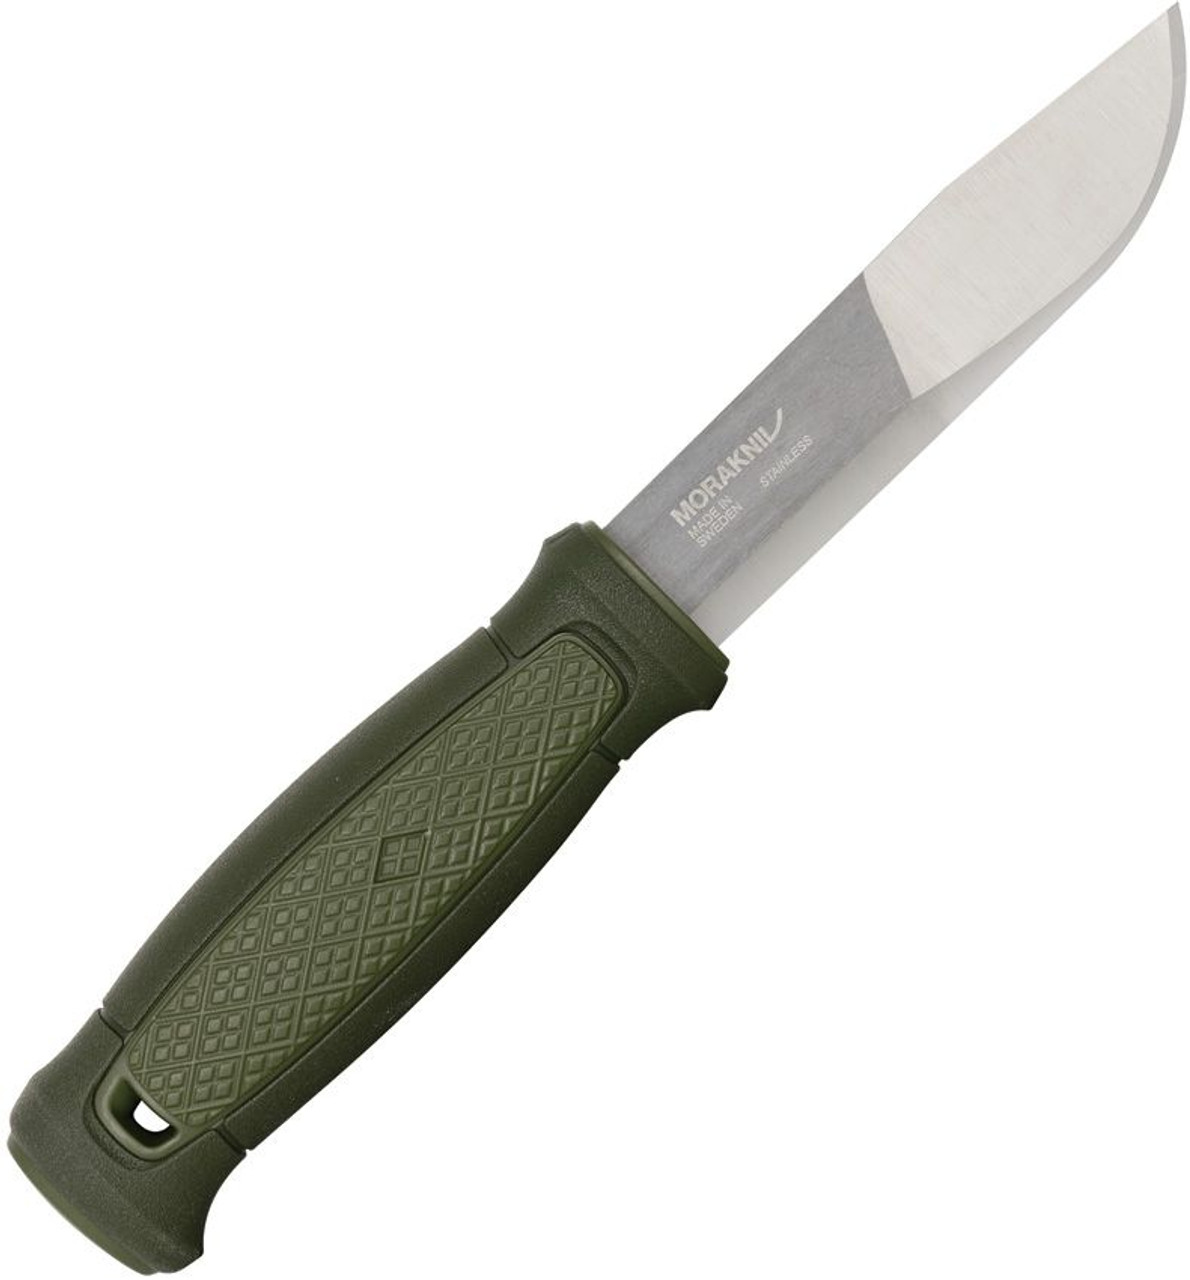 Morakniv Kansbol w Survival Kit (FT02566) 4.125" 12C27 Stainless Steel Satin Drop Point Plain Blade, Green Polymer with Rubber Insert Handle, Green Polymer Sheath, Detachable Survival Kit with Fire Starter, Diamond Sharpener, and Reflective Paracord, Detachable Leather Belt Loop